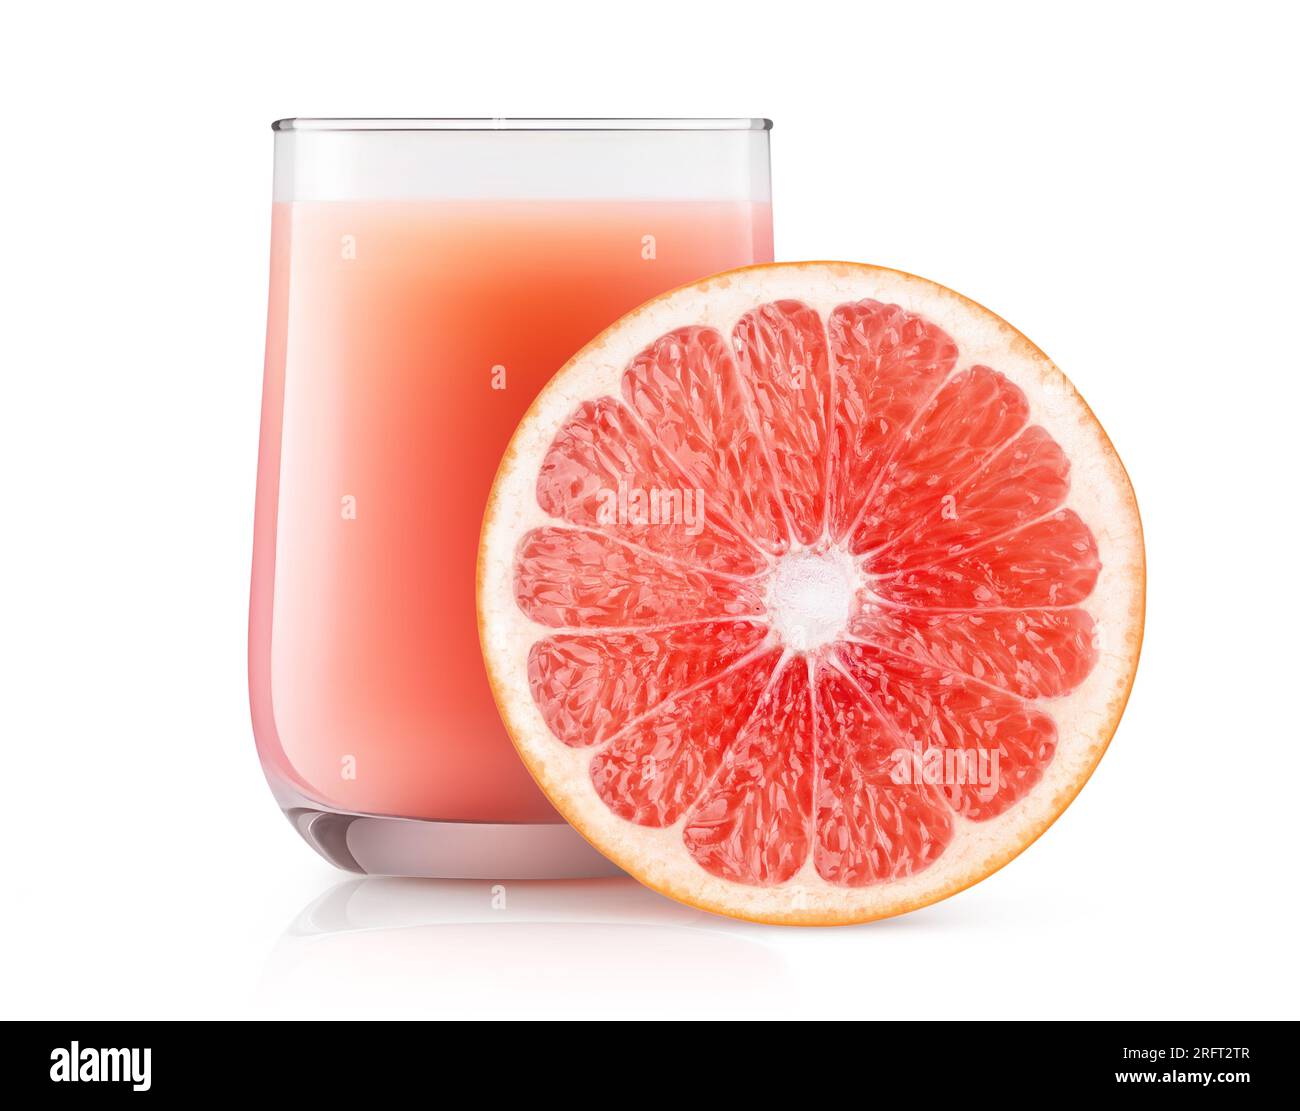 Fresh grapefruit juice in a glass and a slice of pink grapefruit, isolated on white Stock Photo